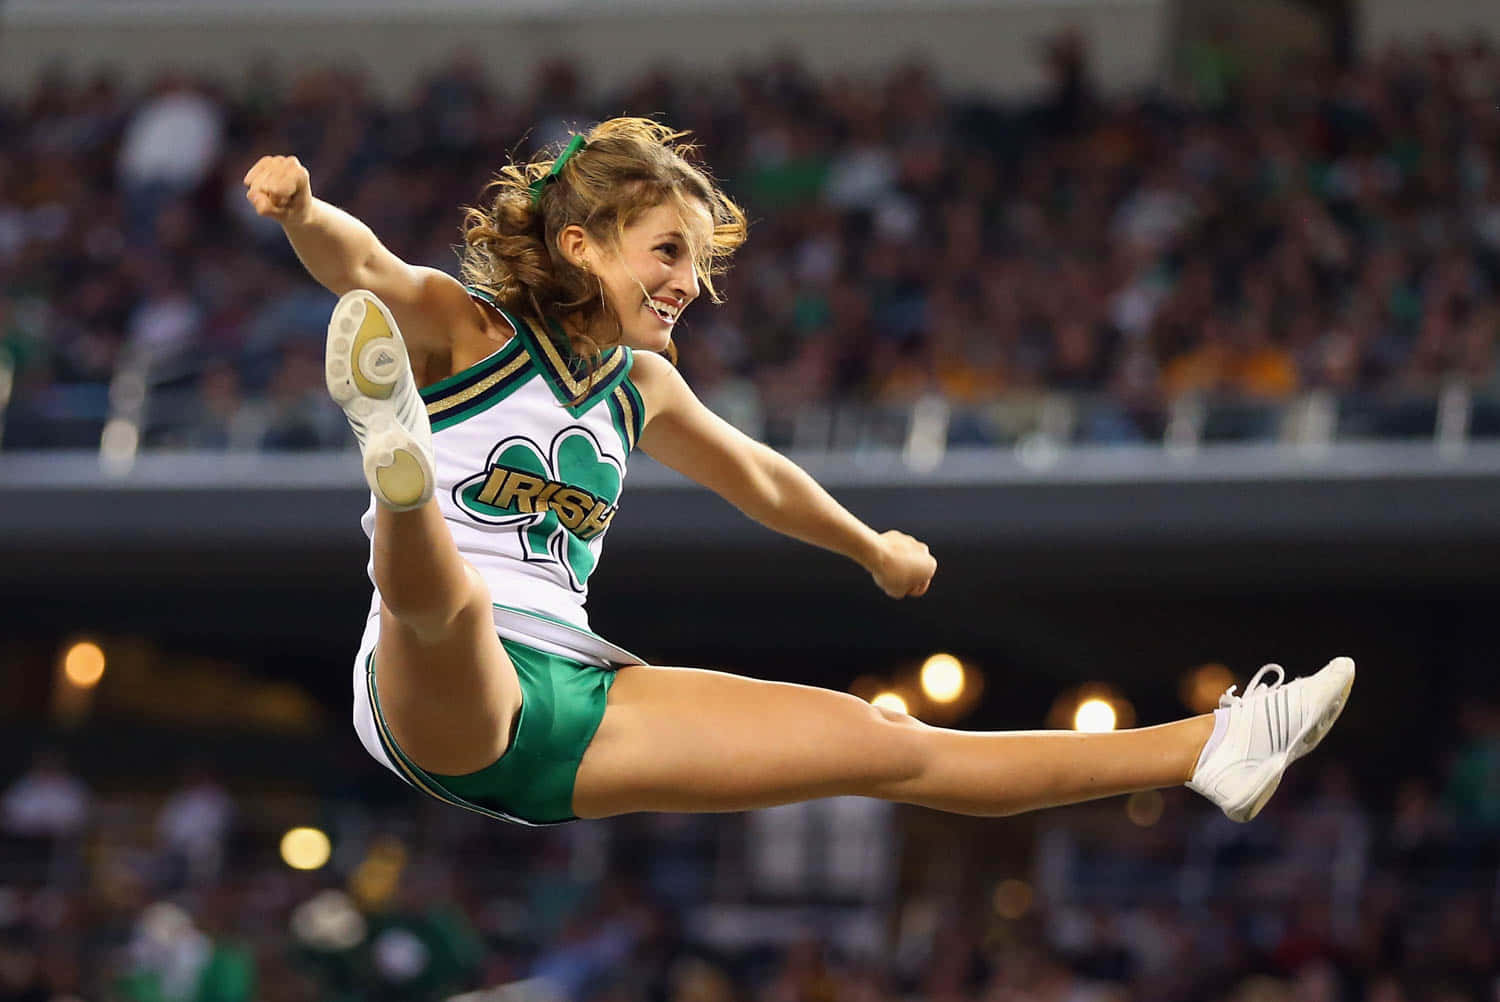 Cheerleader Jumping In The Air Picture